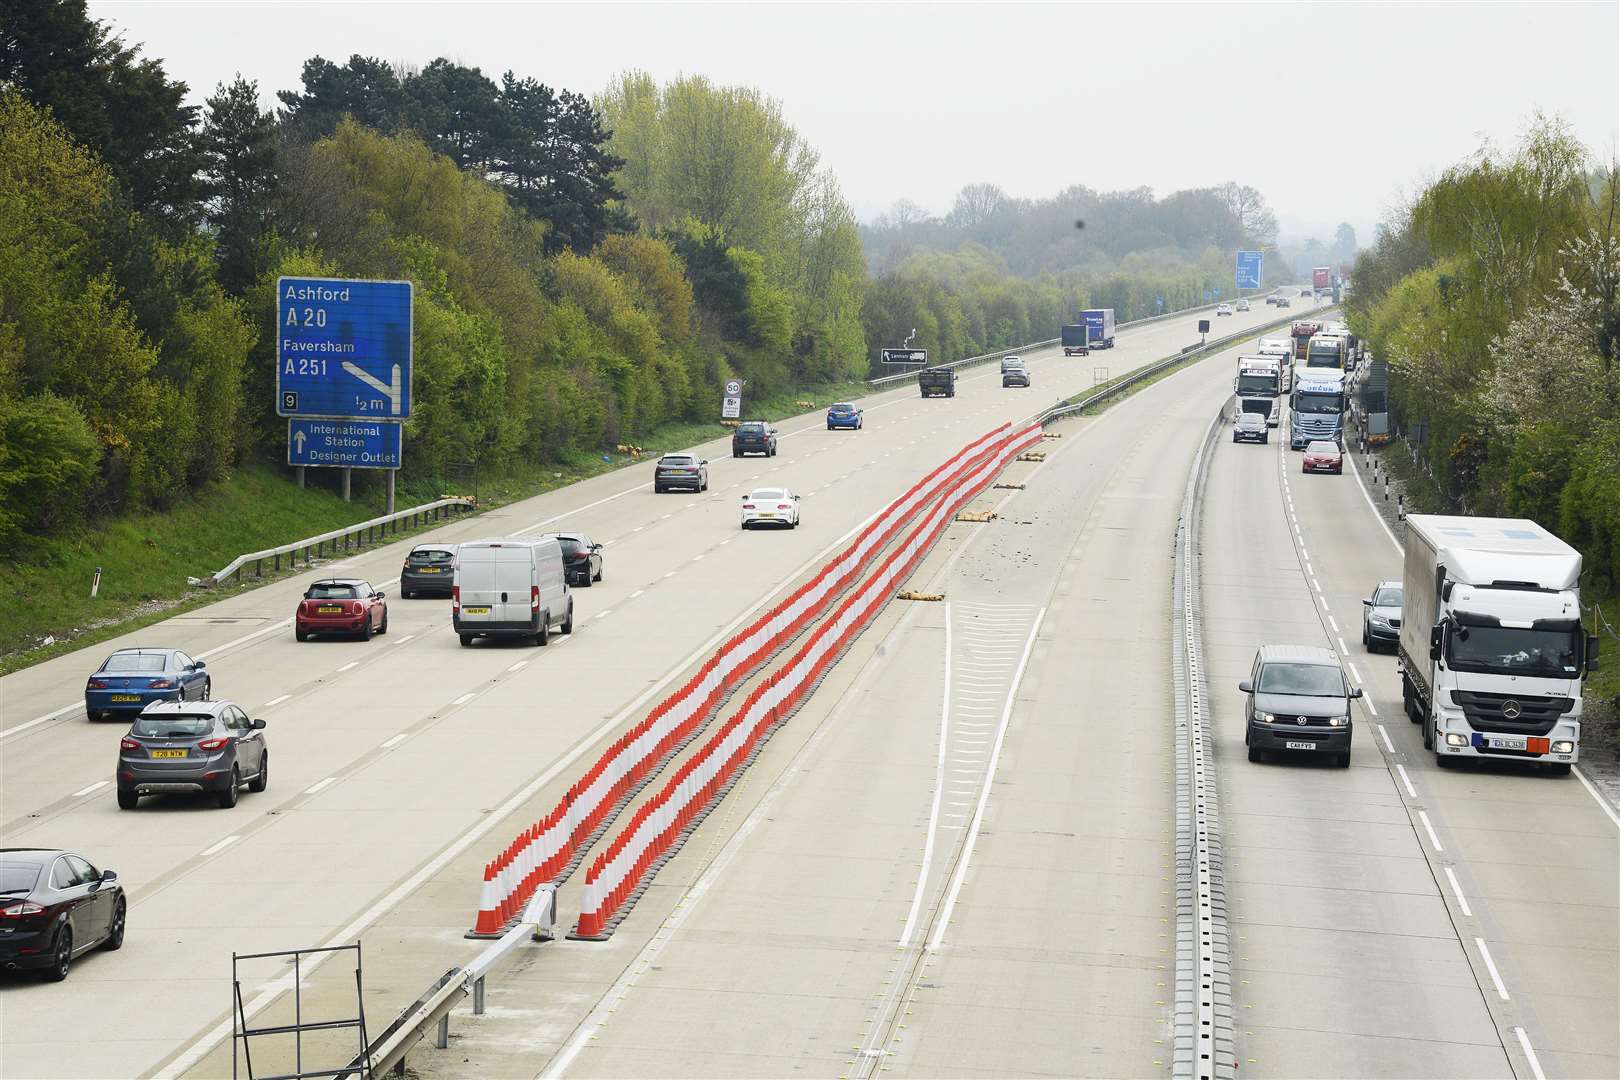 The barrier is still in place on the London-bound stretch